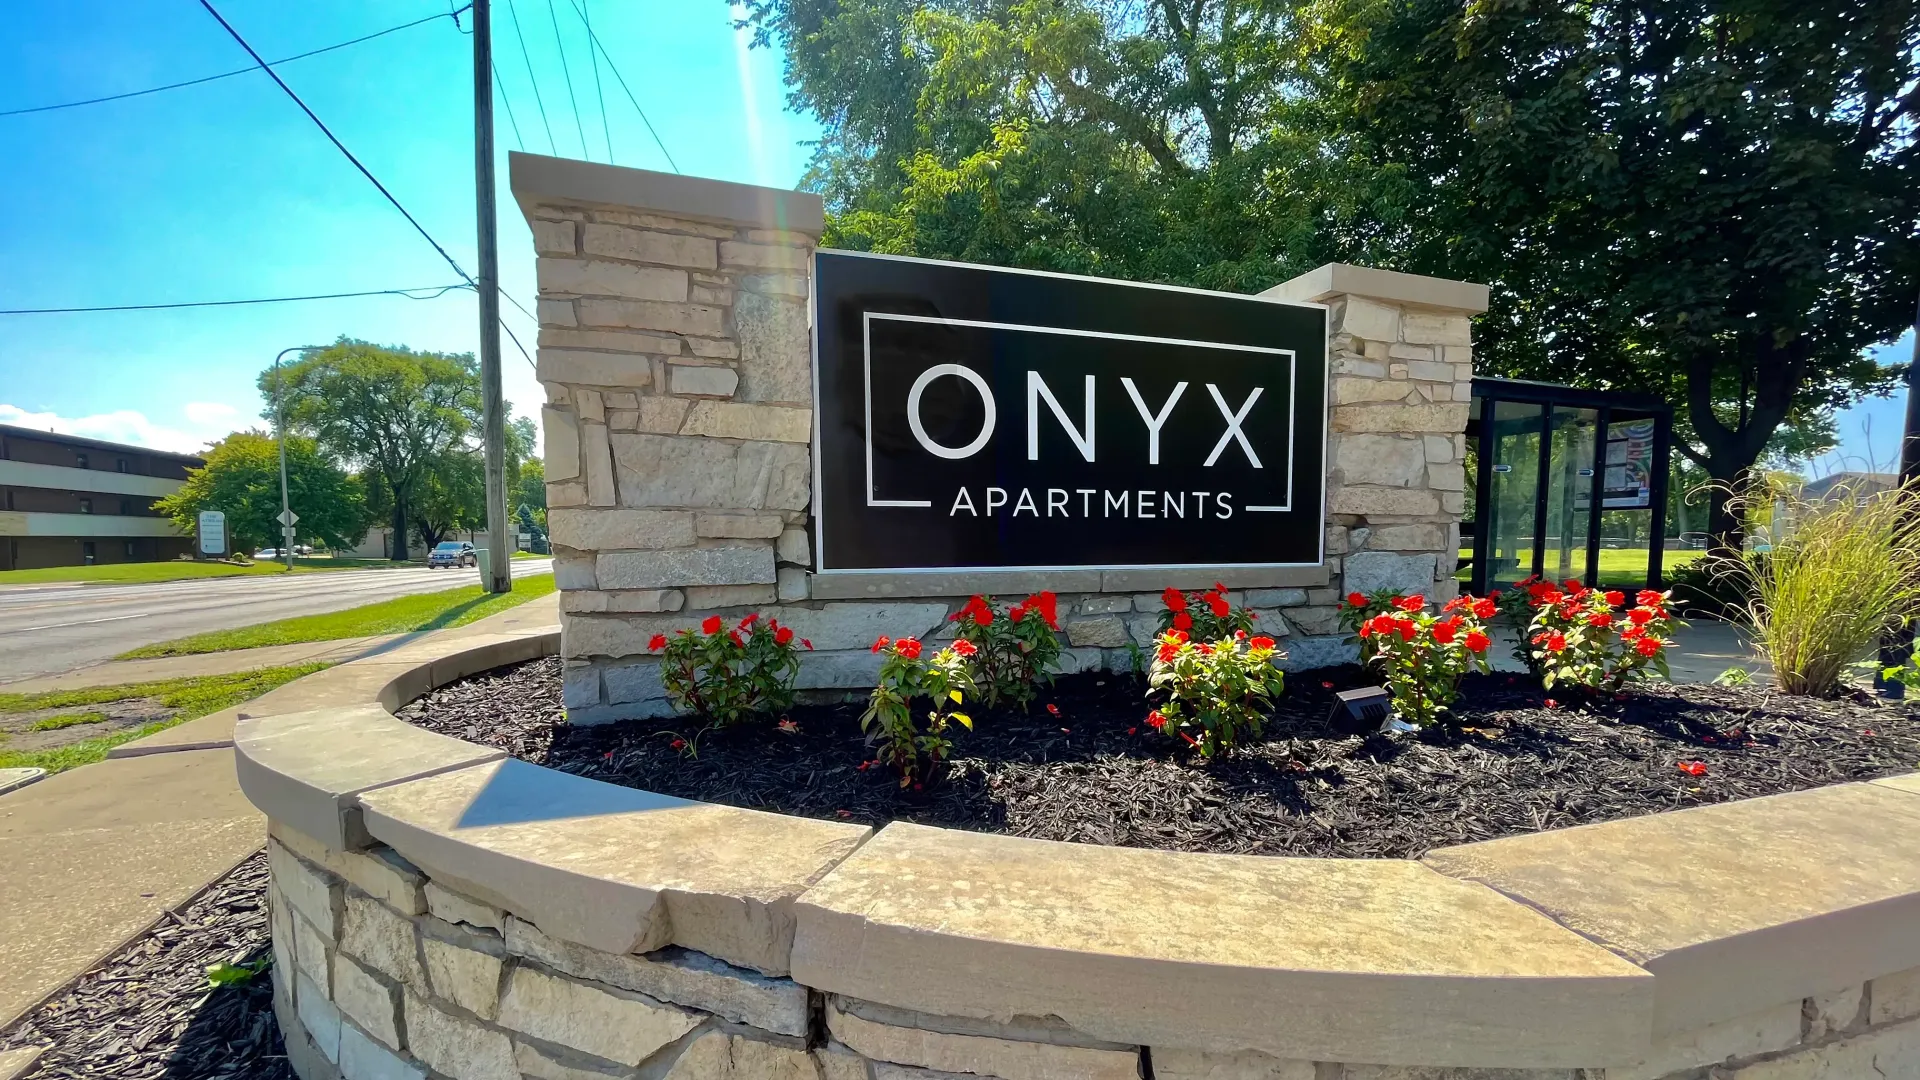 A front entrance with sign for ONYX